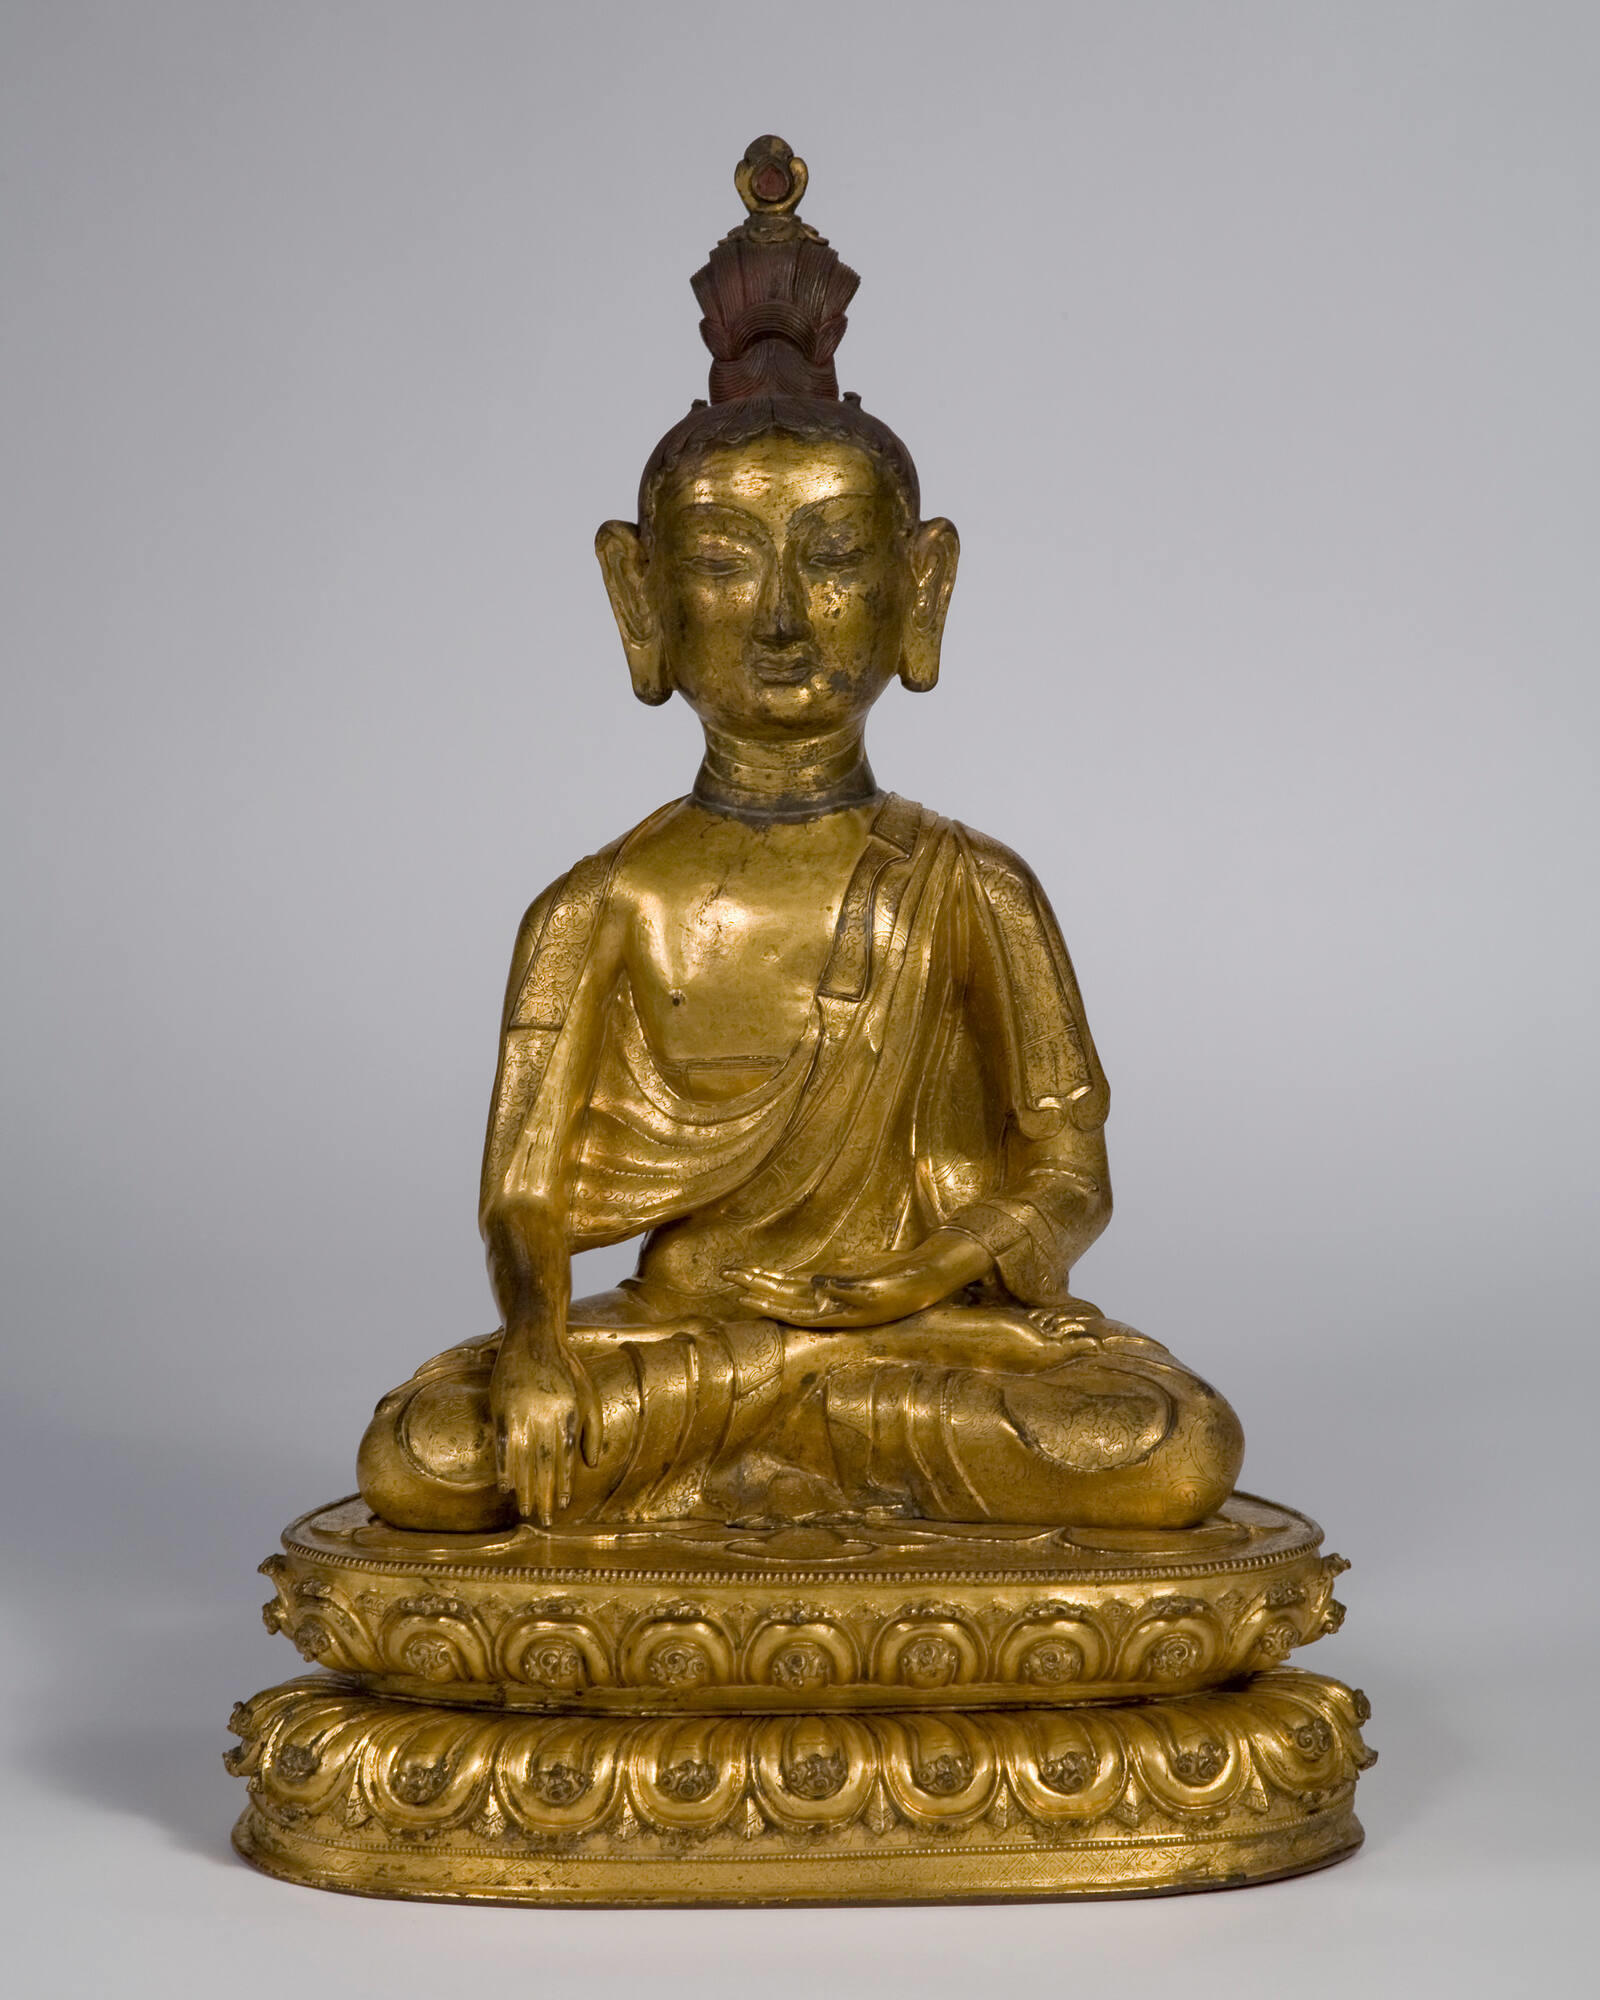 Gold statue of the Buddha sits cross-legged with his hands resting on his knee and lap. 